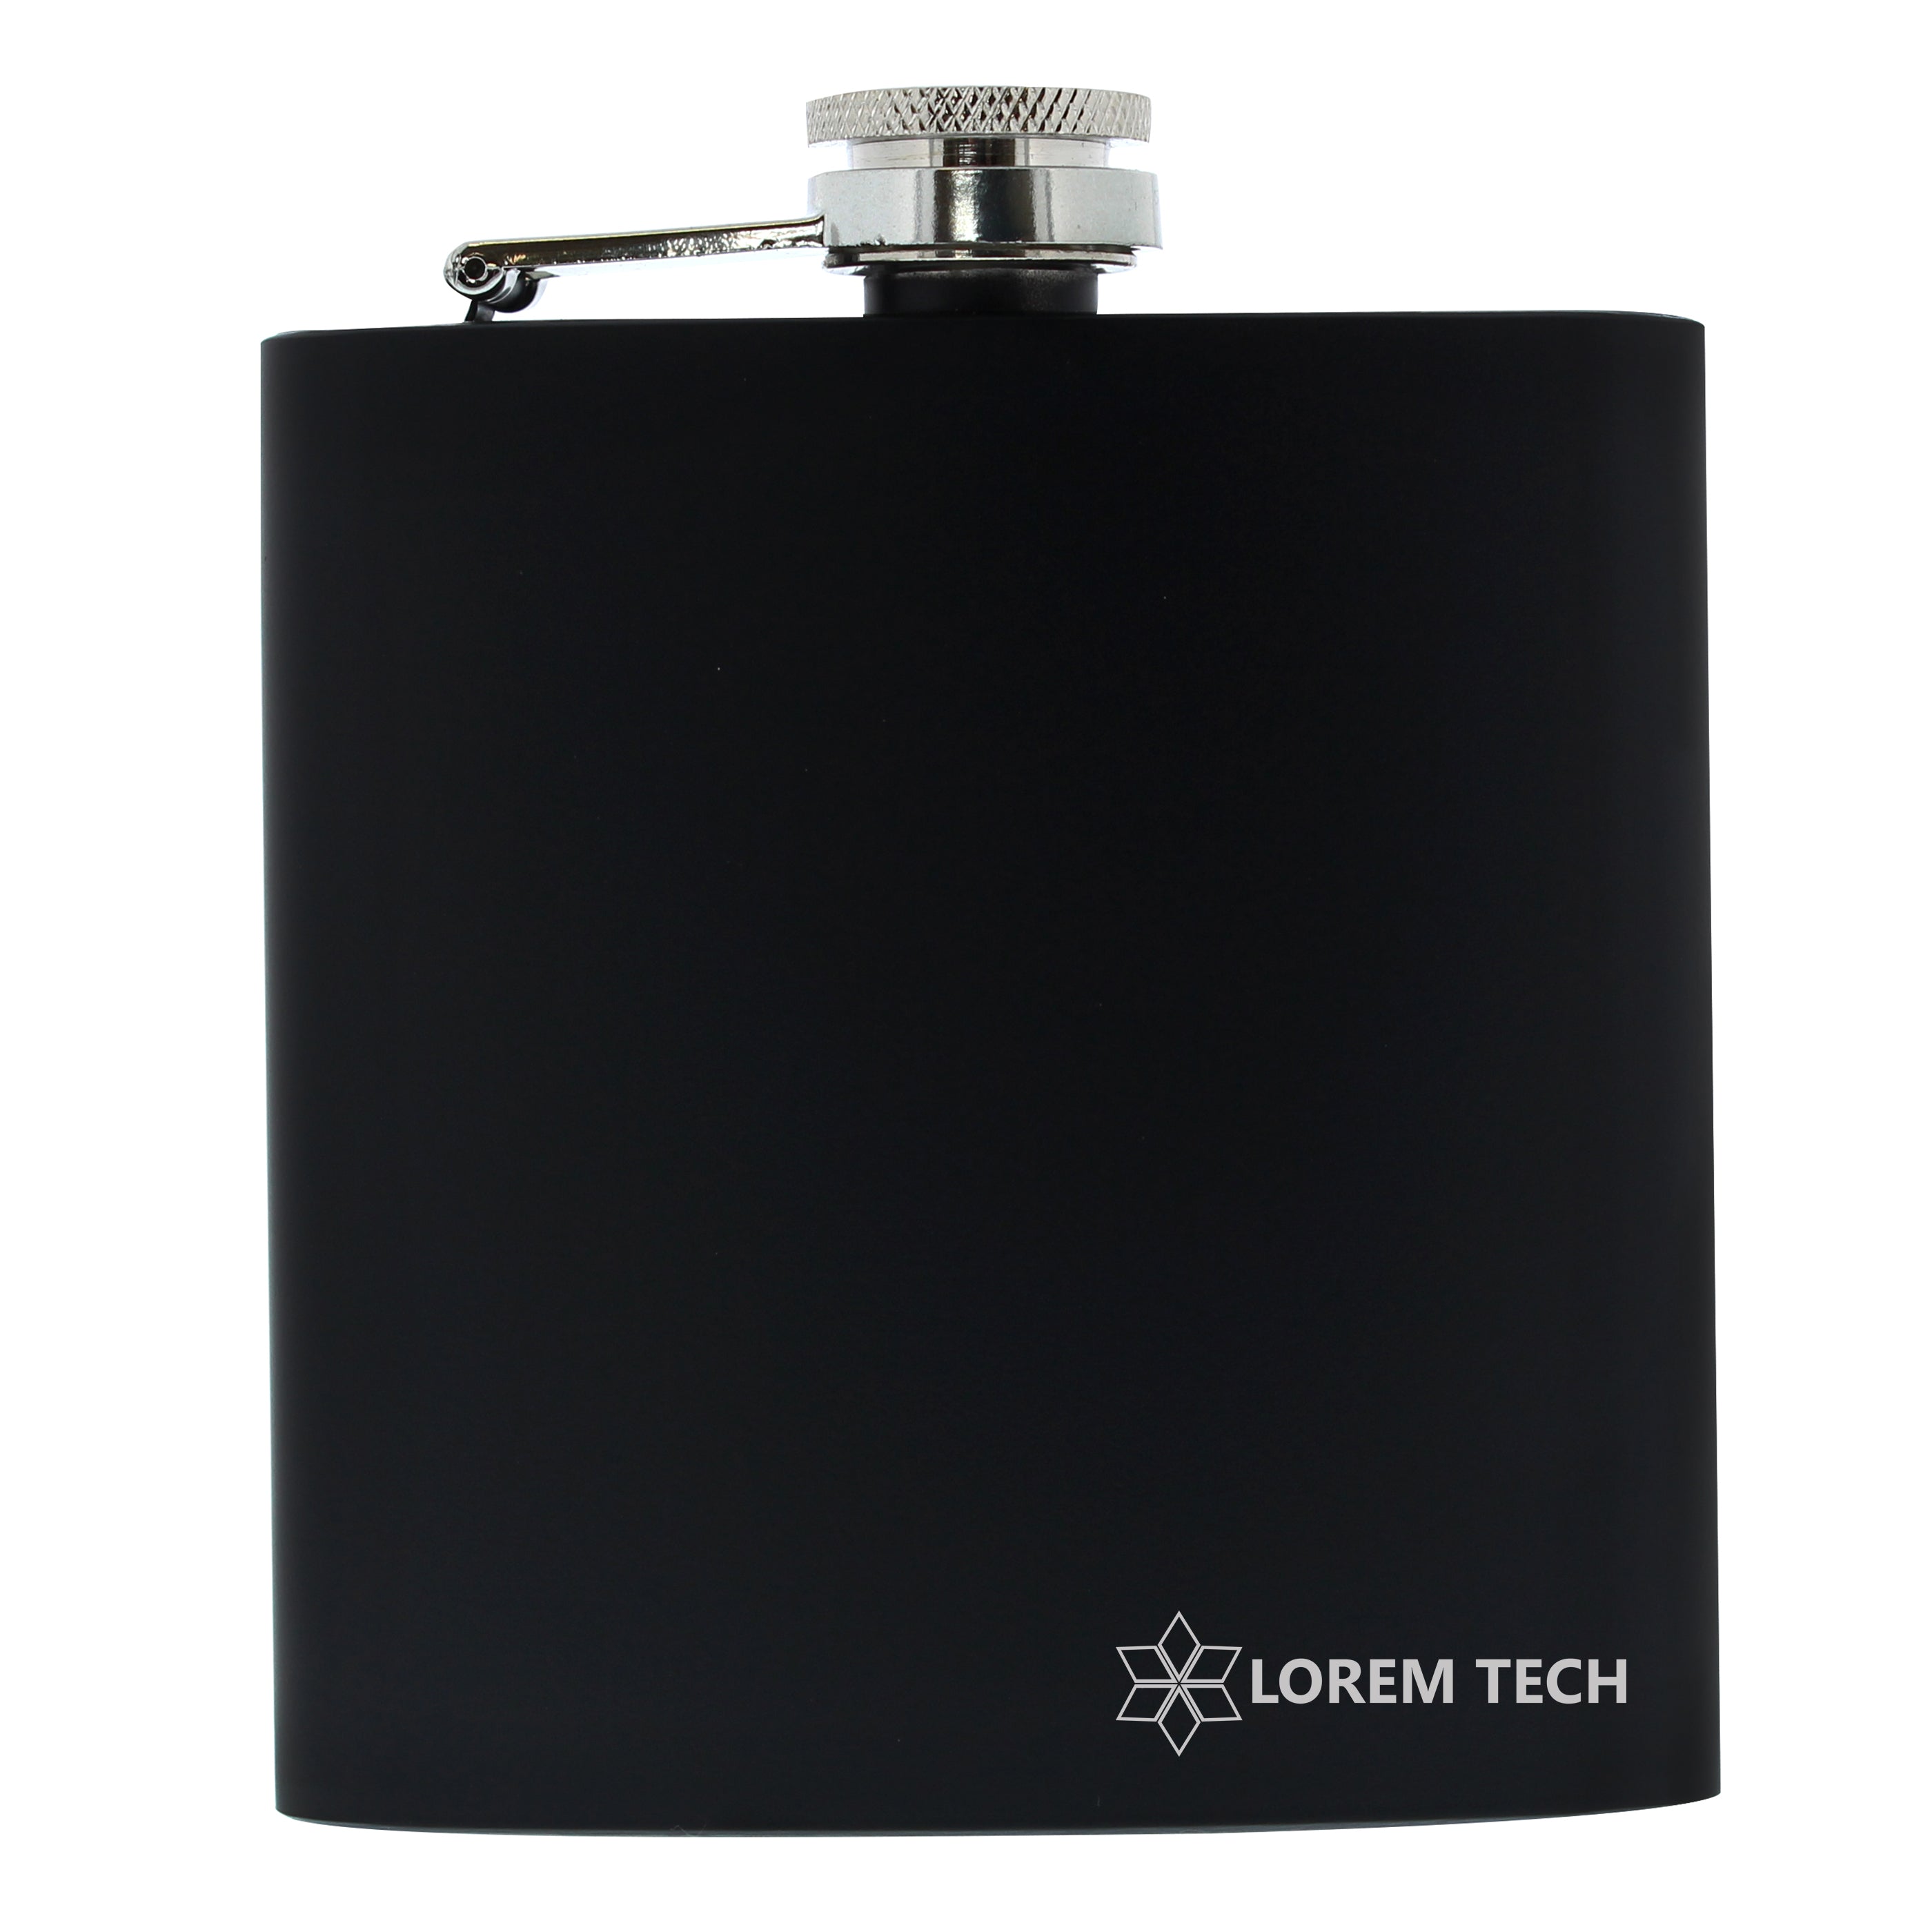 Black Hip Flask Engraved With Company Logo